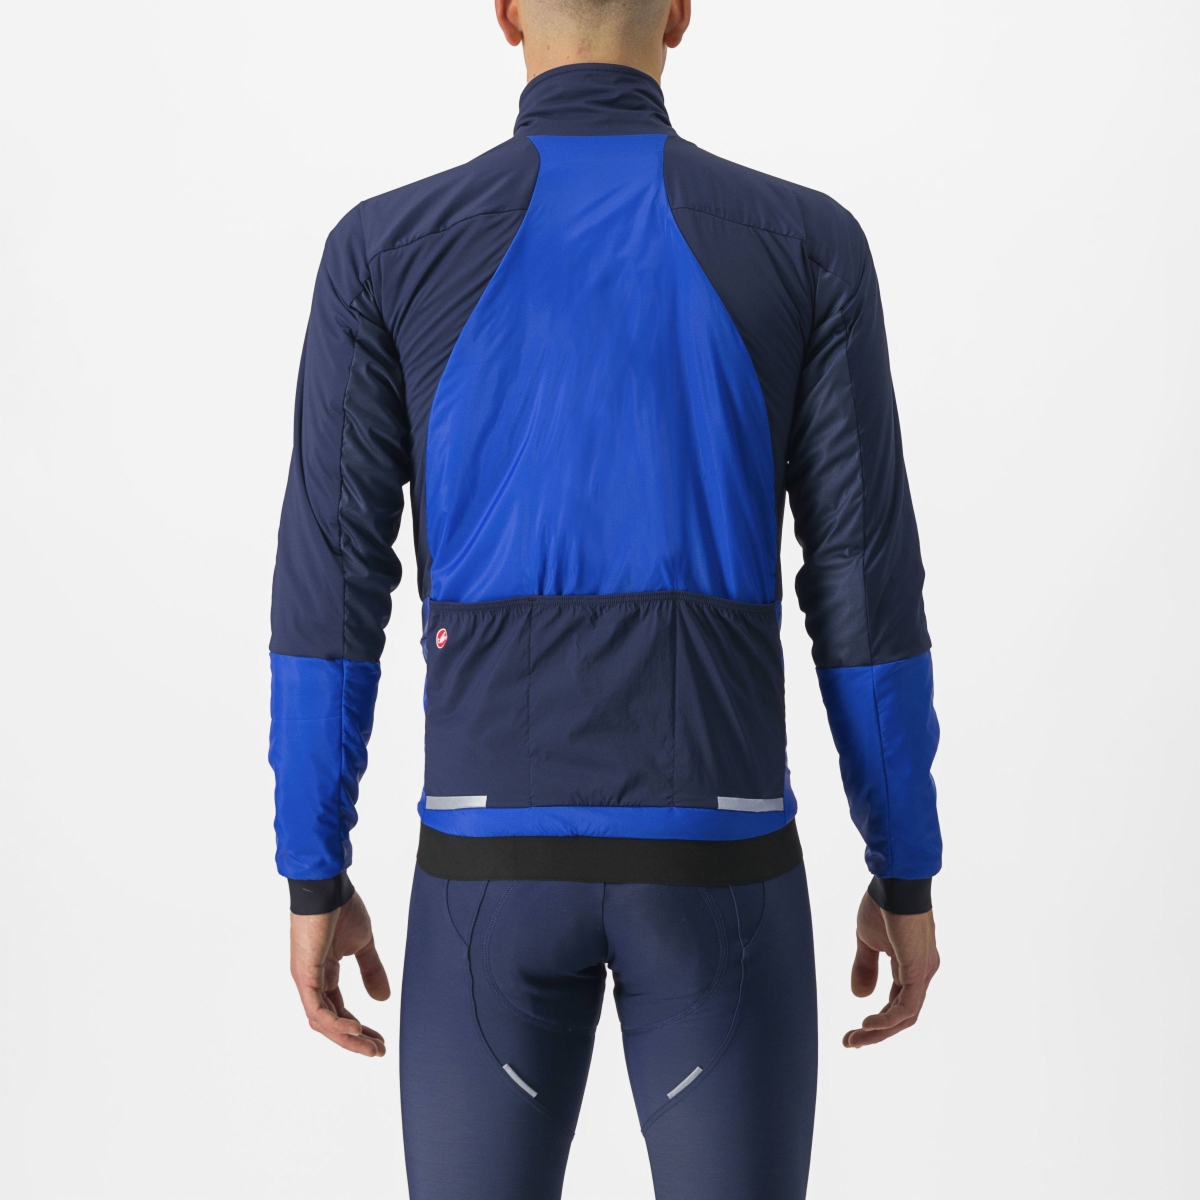 FLY THERMAL JACKET